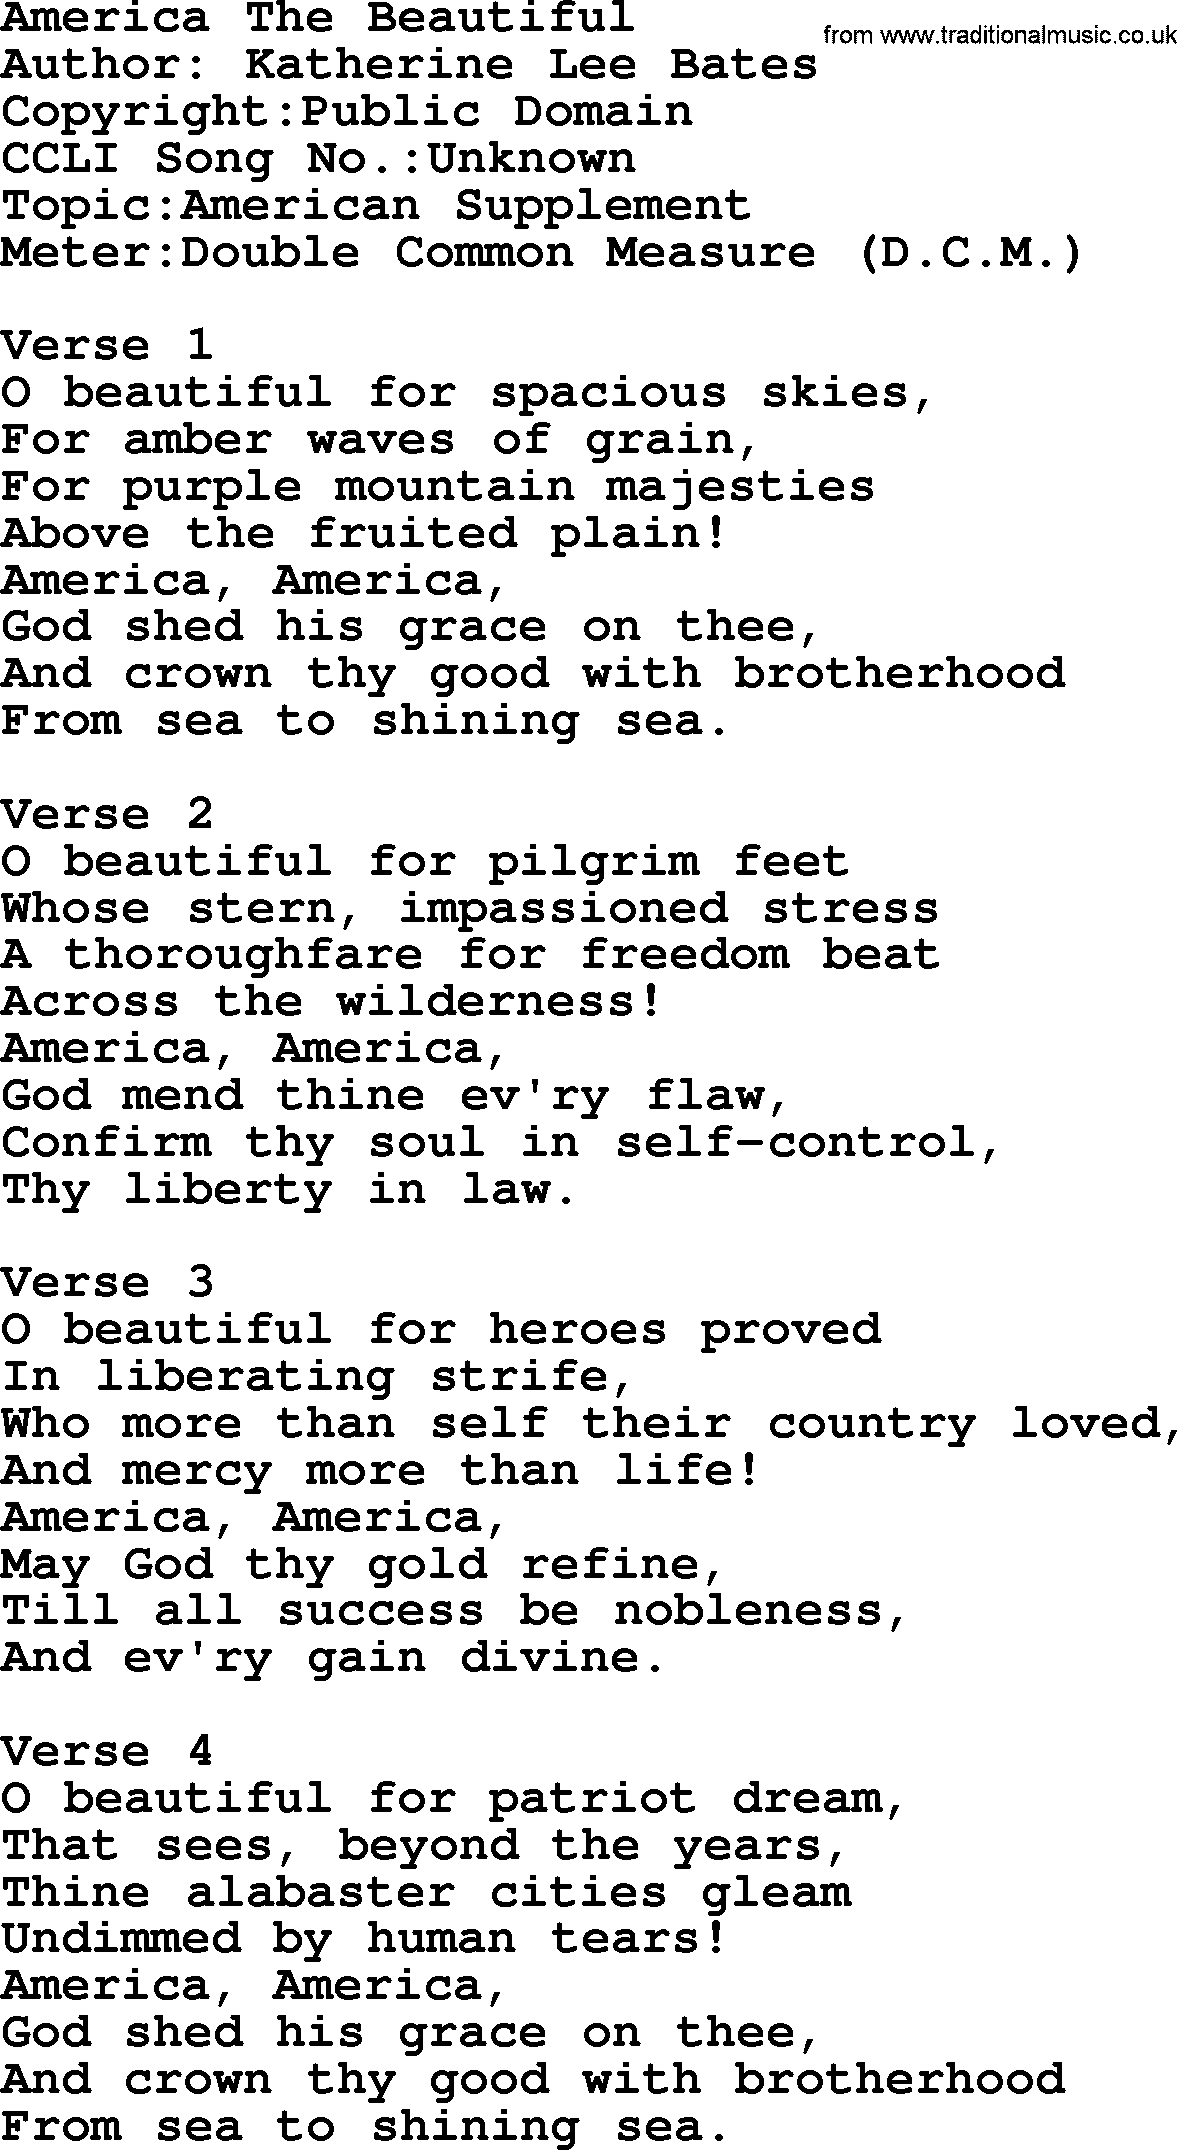 A collection of 500+ most sung Christian church hymns and songs, title: America The Beautiful, lyrics, PPTX and PDF